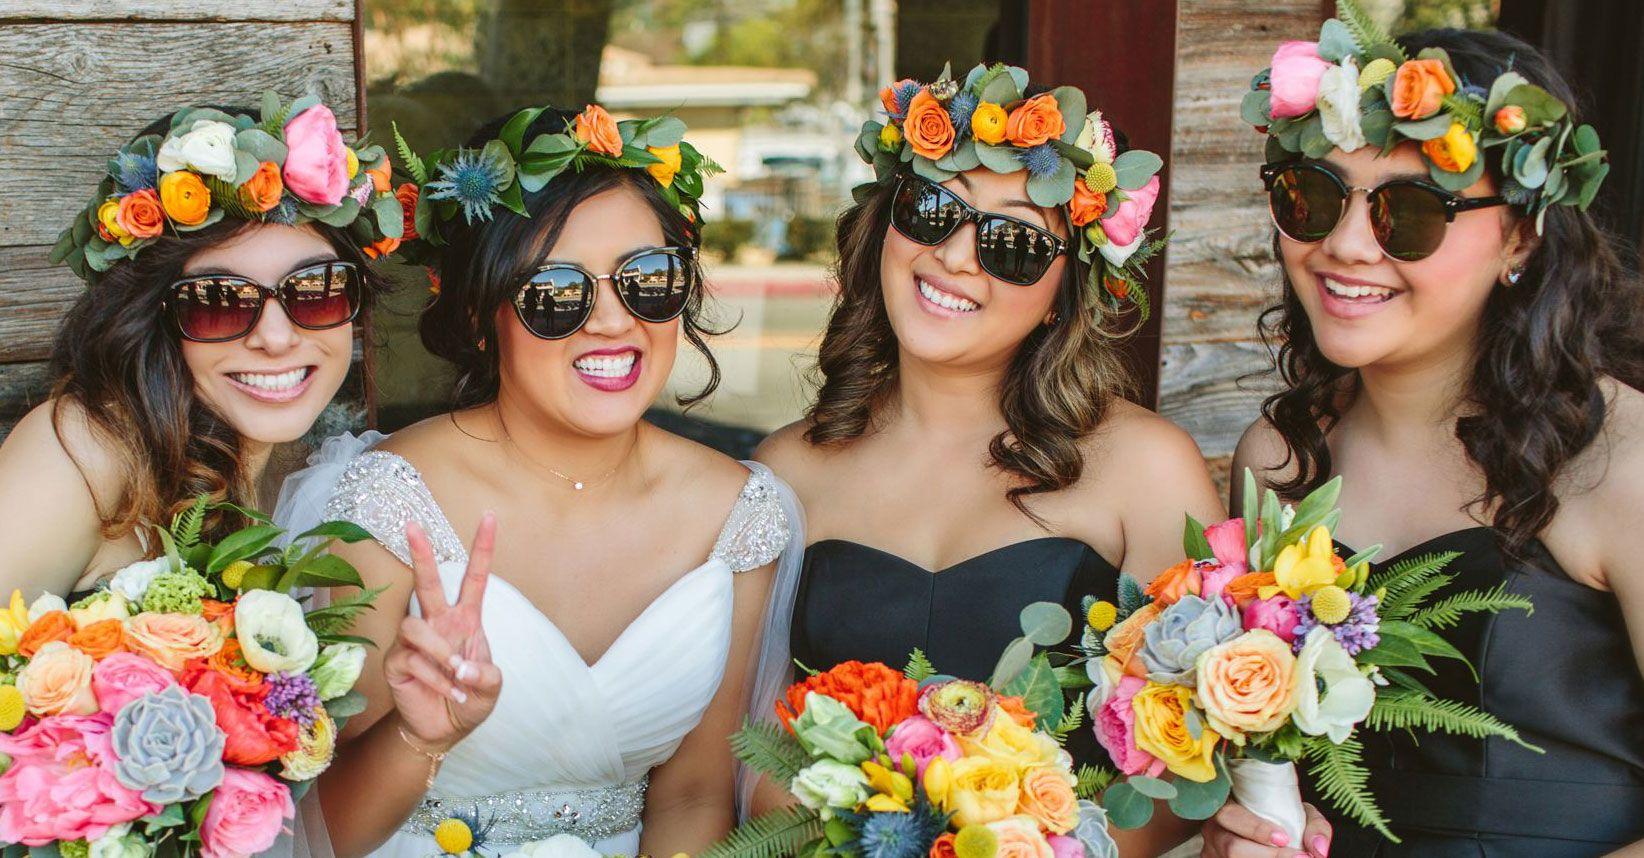 Dreamy Flower Bridal Crowns Perfect for Your Wedding